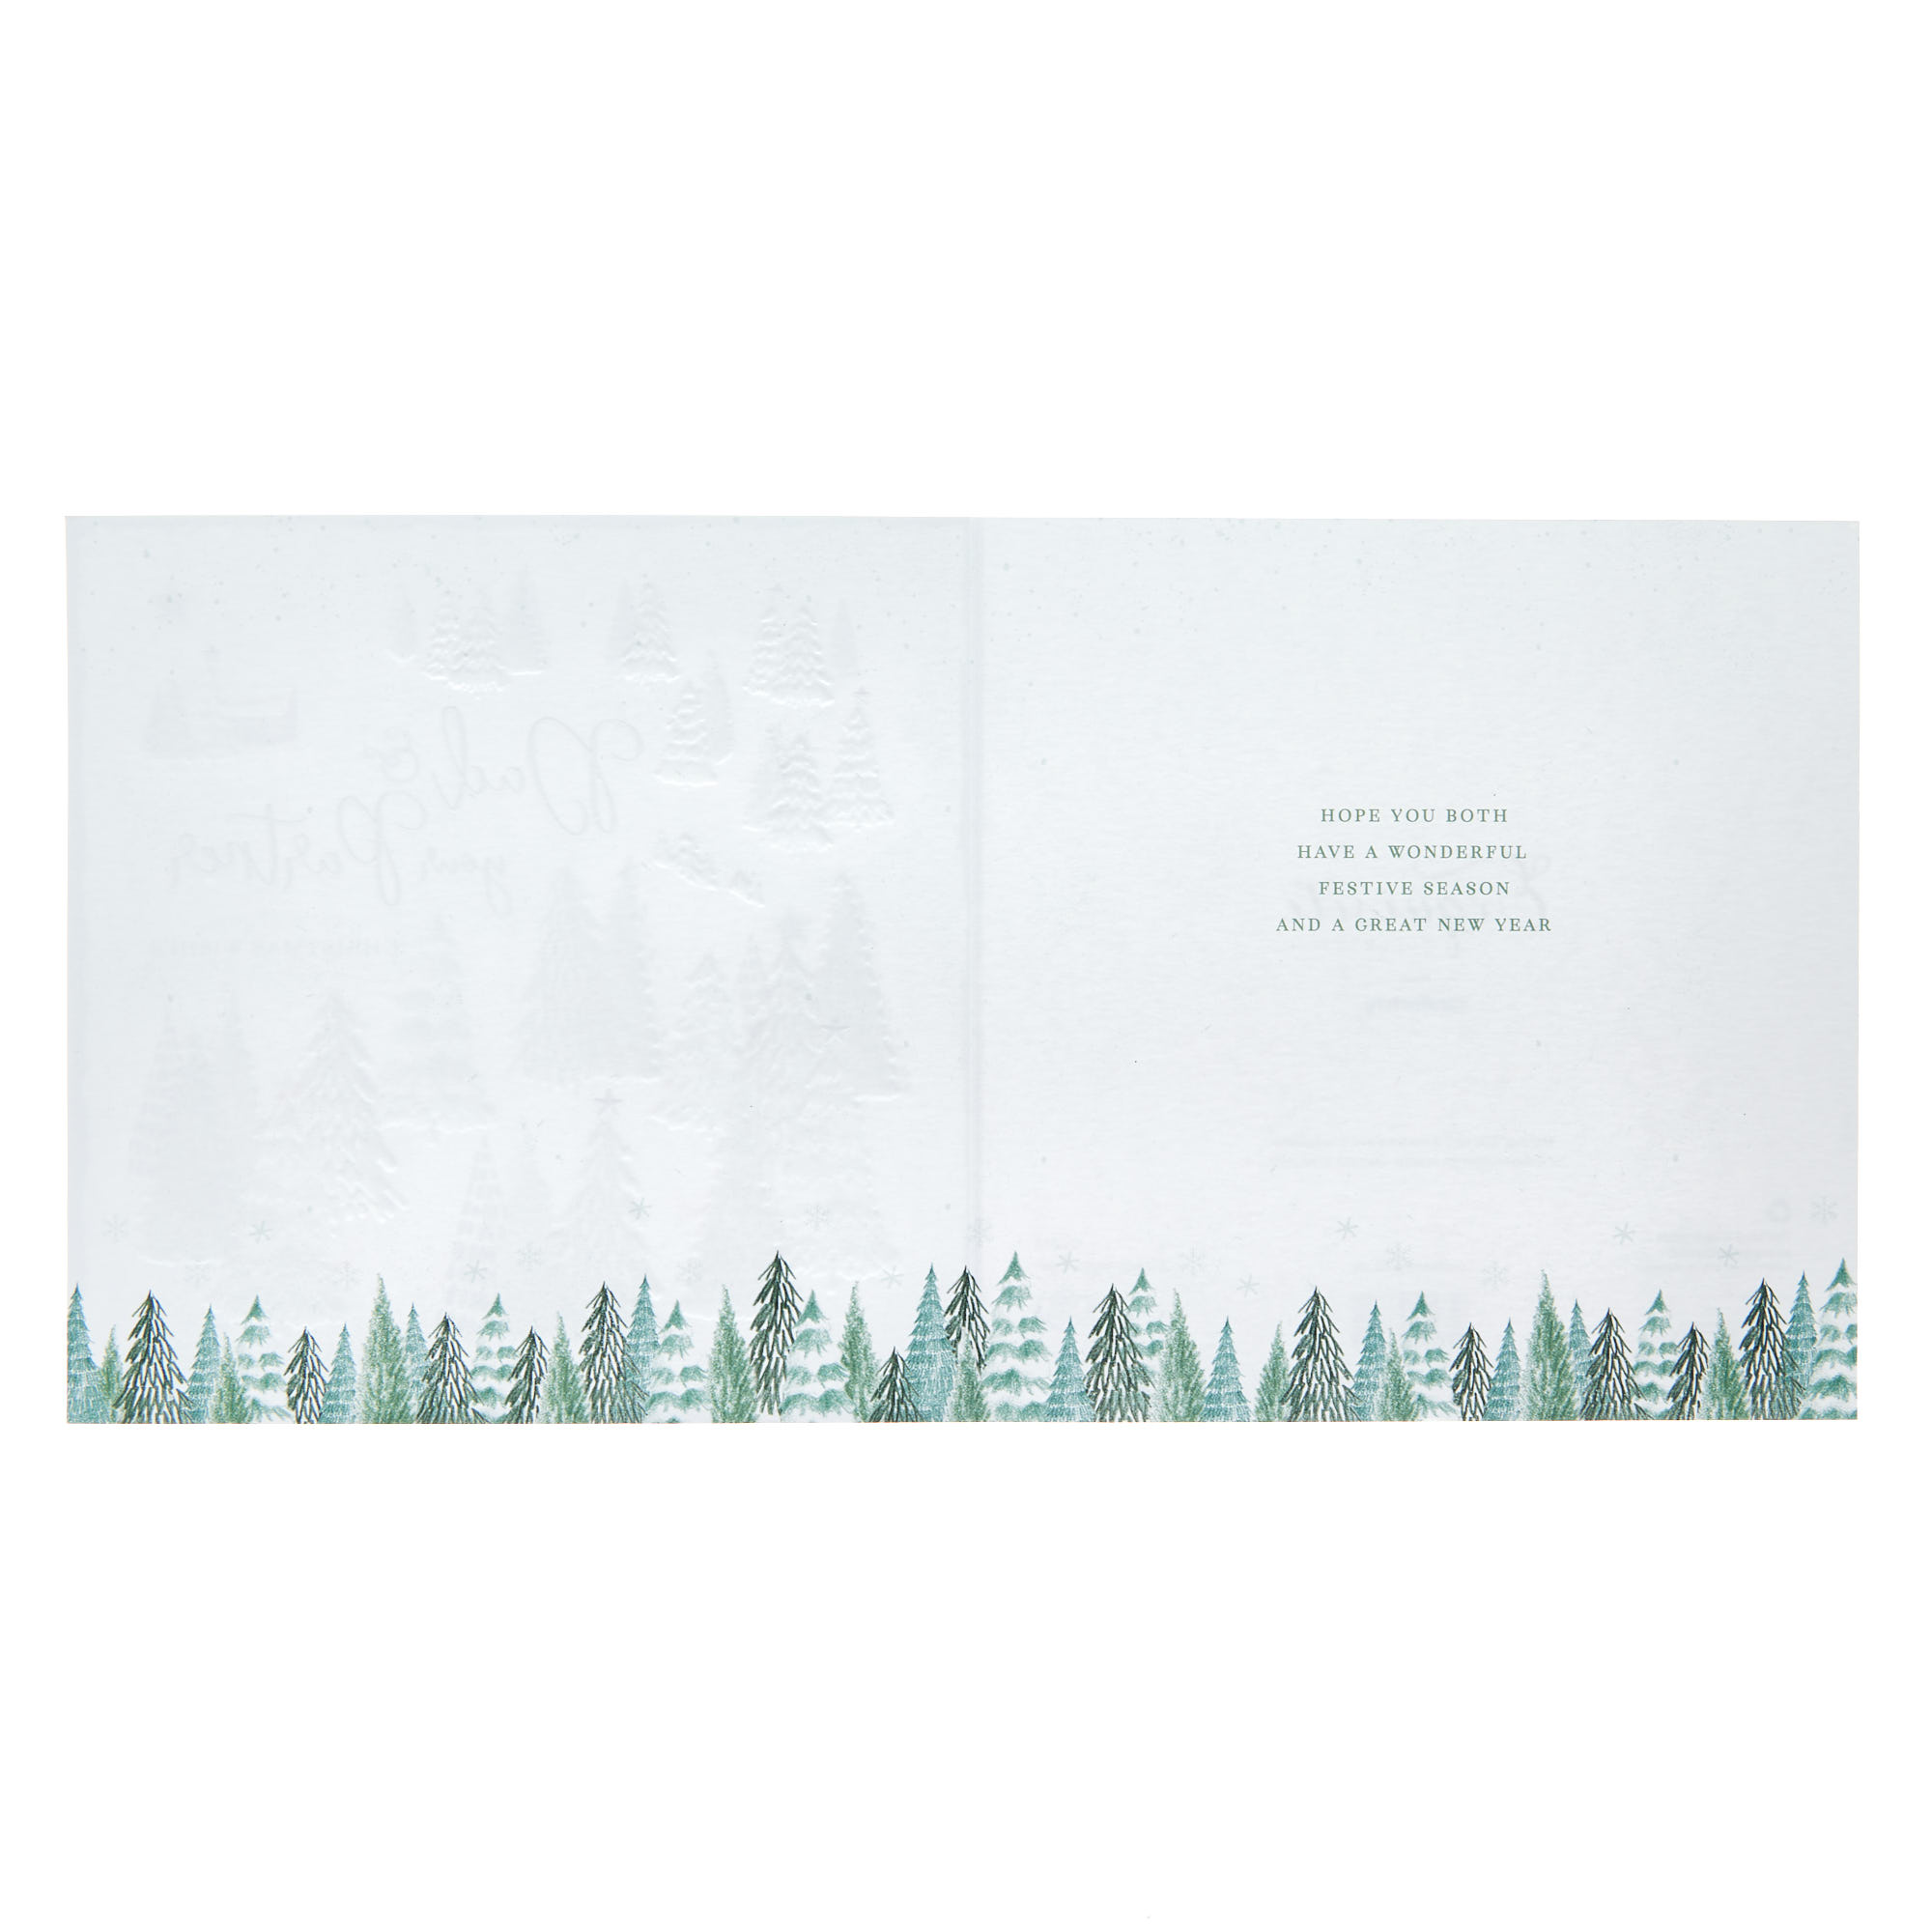 Exquisite Dad & Partner Trees Christmas Card